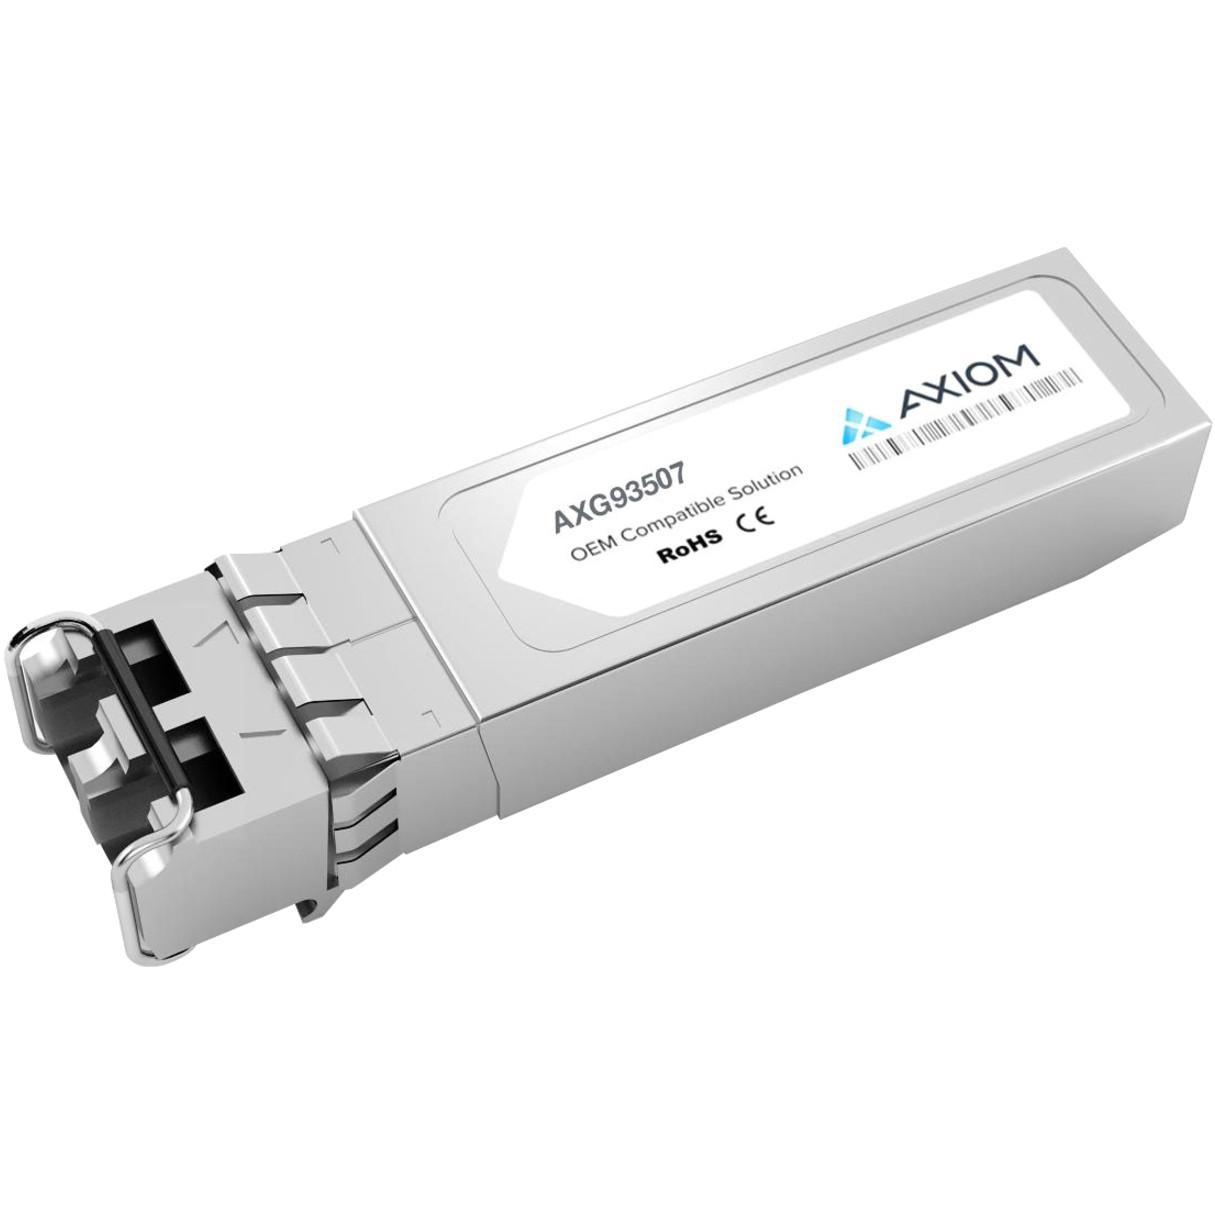 Axiom Memory Solutions 10GBASE-LR/LW SFP+ Transceiver for CiscoSFP-10G-LR-XTAA CompliantFor Data Networking, Optical Network1 x 10GBase-LR10 Gbit/s” AXG93507